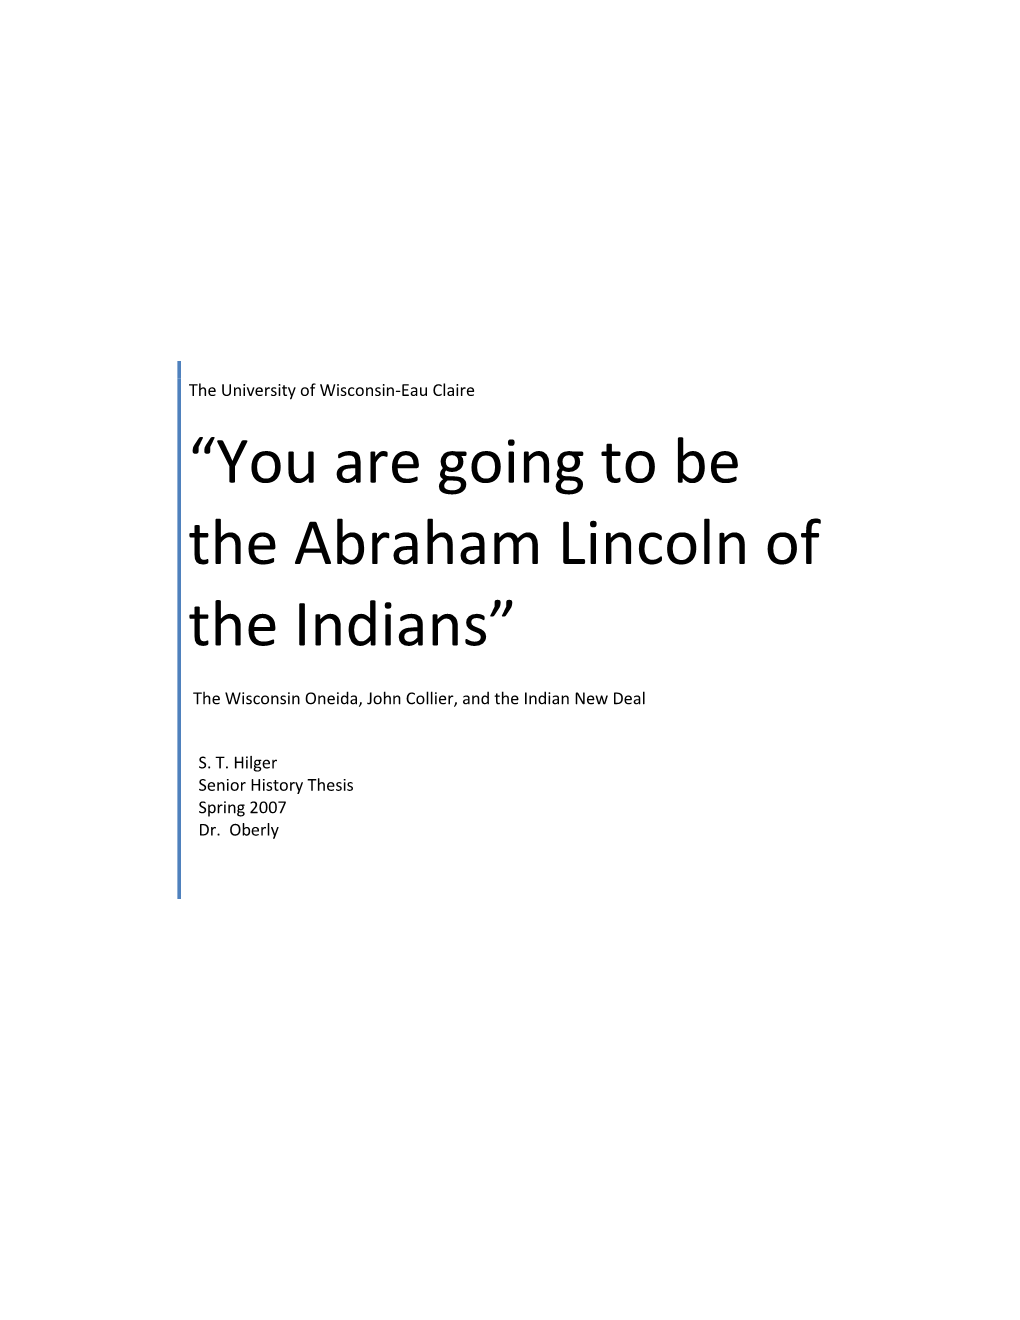 “You Are Going to Be the Abraham Lincoln of the Indians”